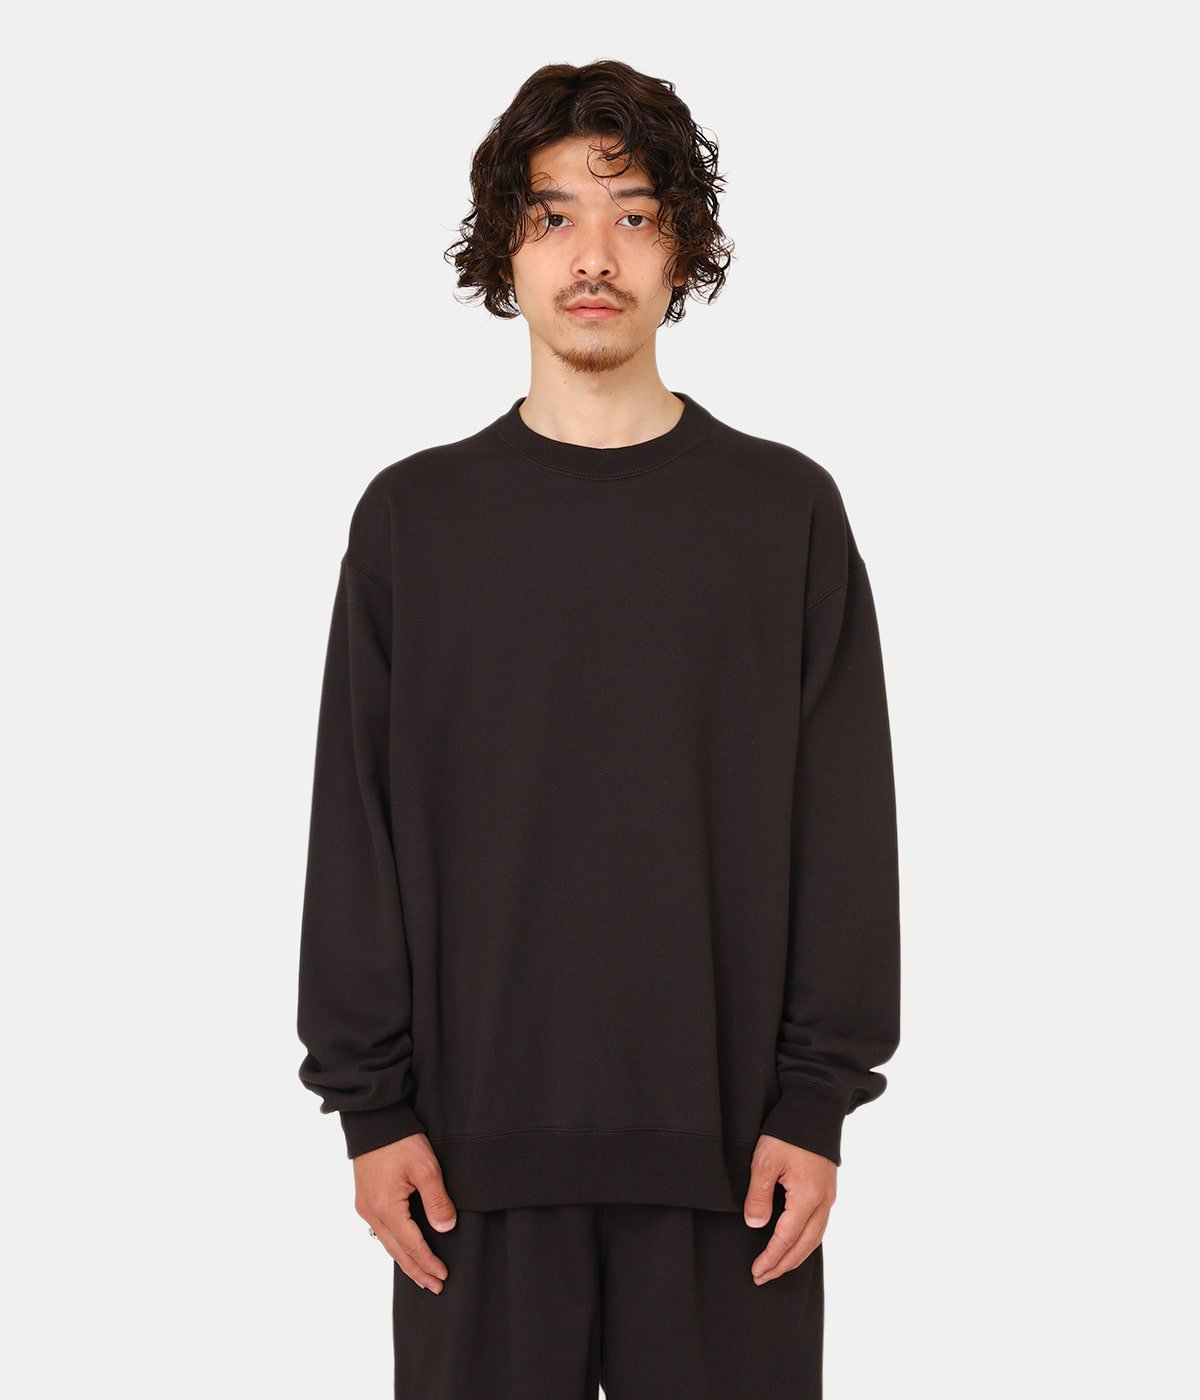 CREW NECK 40/2 recycle suvin organic cotton knit marka(マーカ) トップス  スウェット (メンズ)の通販 ARKnets(アークネッツ) 公式通販 【正規取扱店】